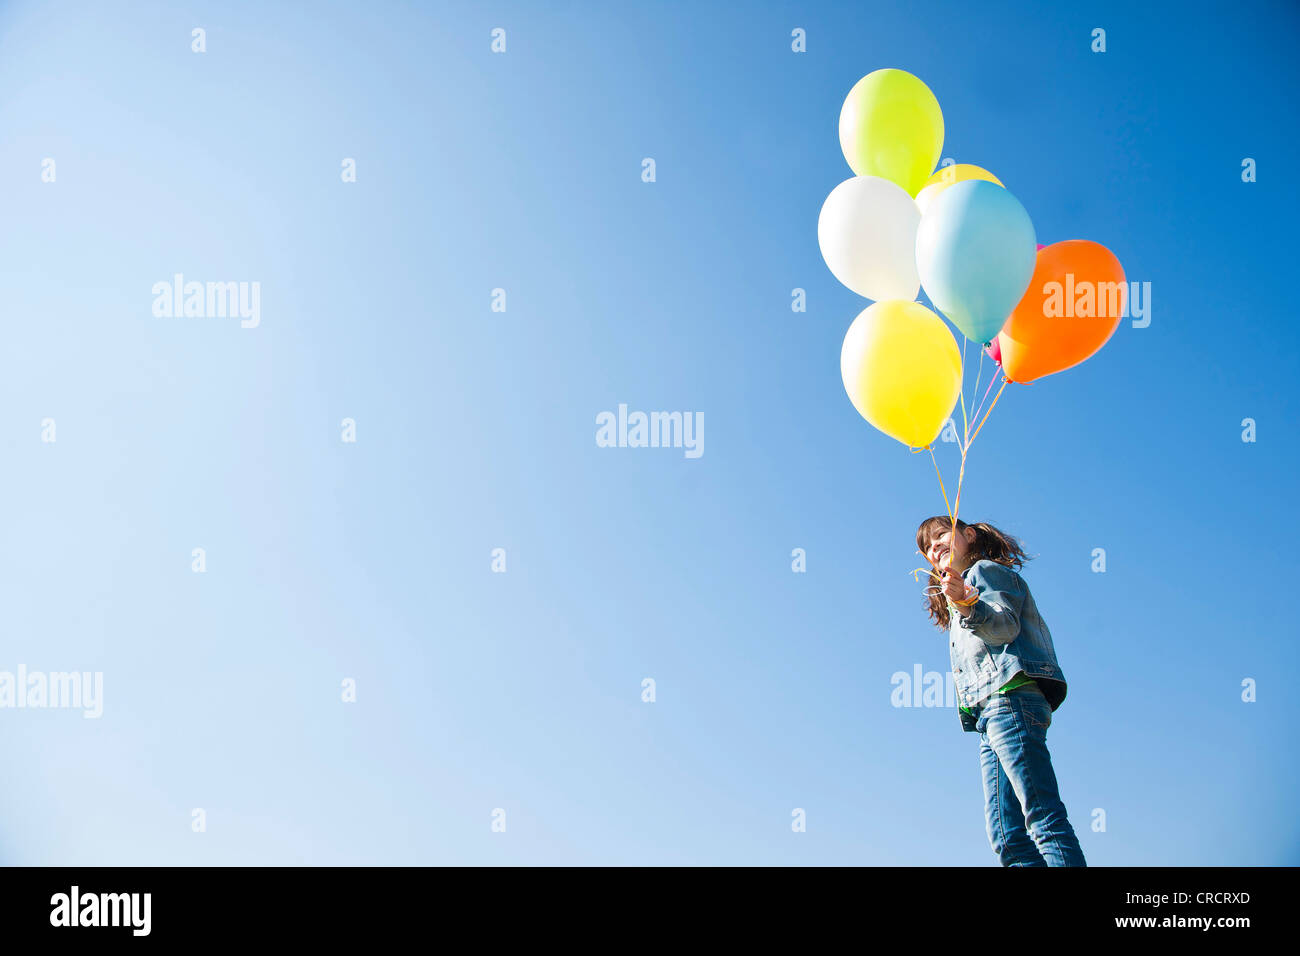 Girl standing with balloons under blue sky Stock Photo